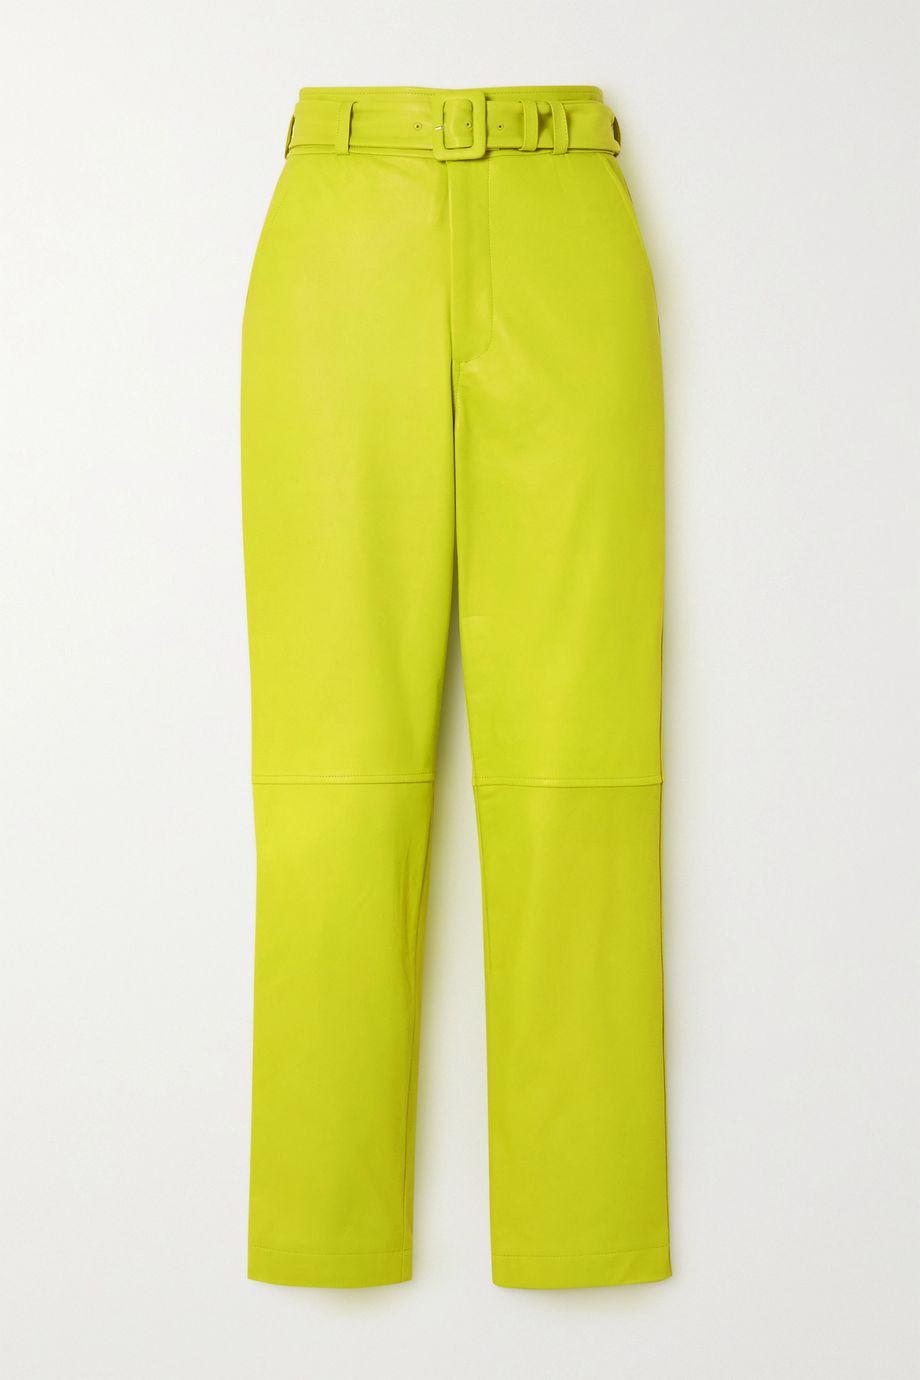 Camila belted neon leather pants by BOUGUESSA